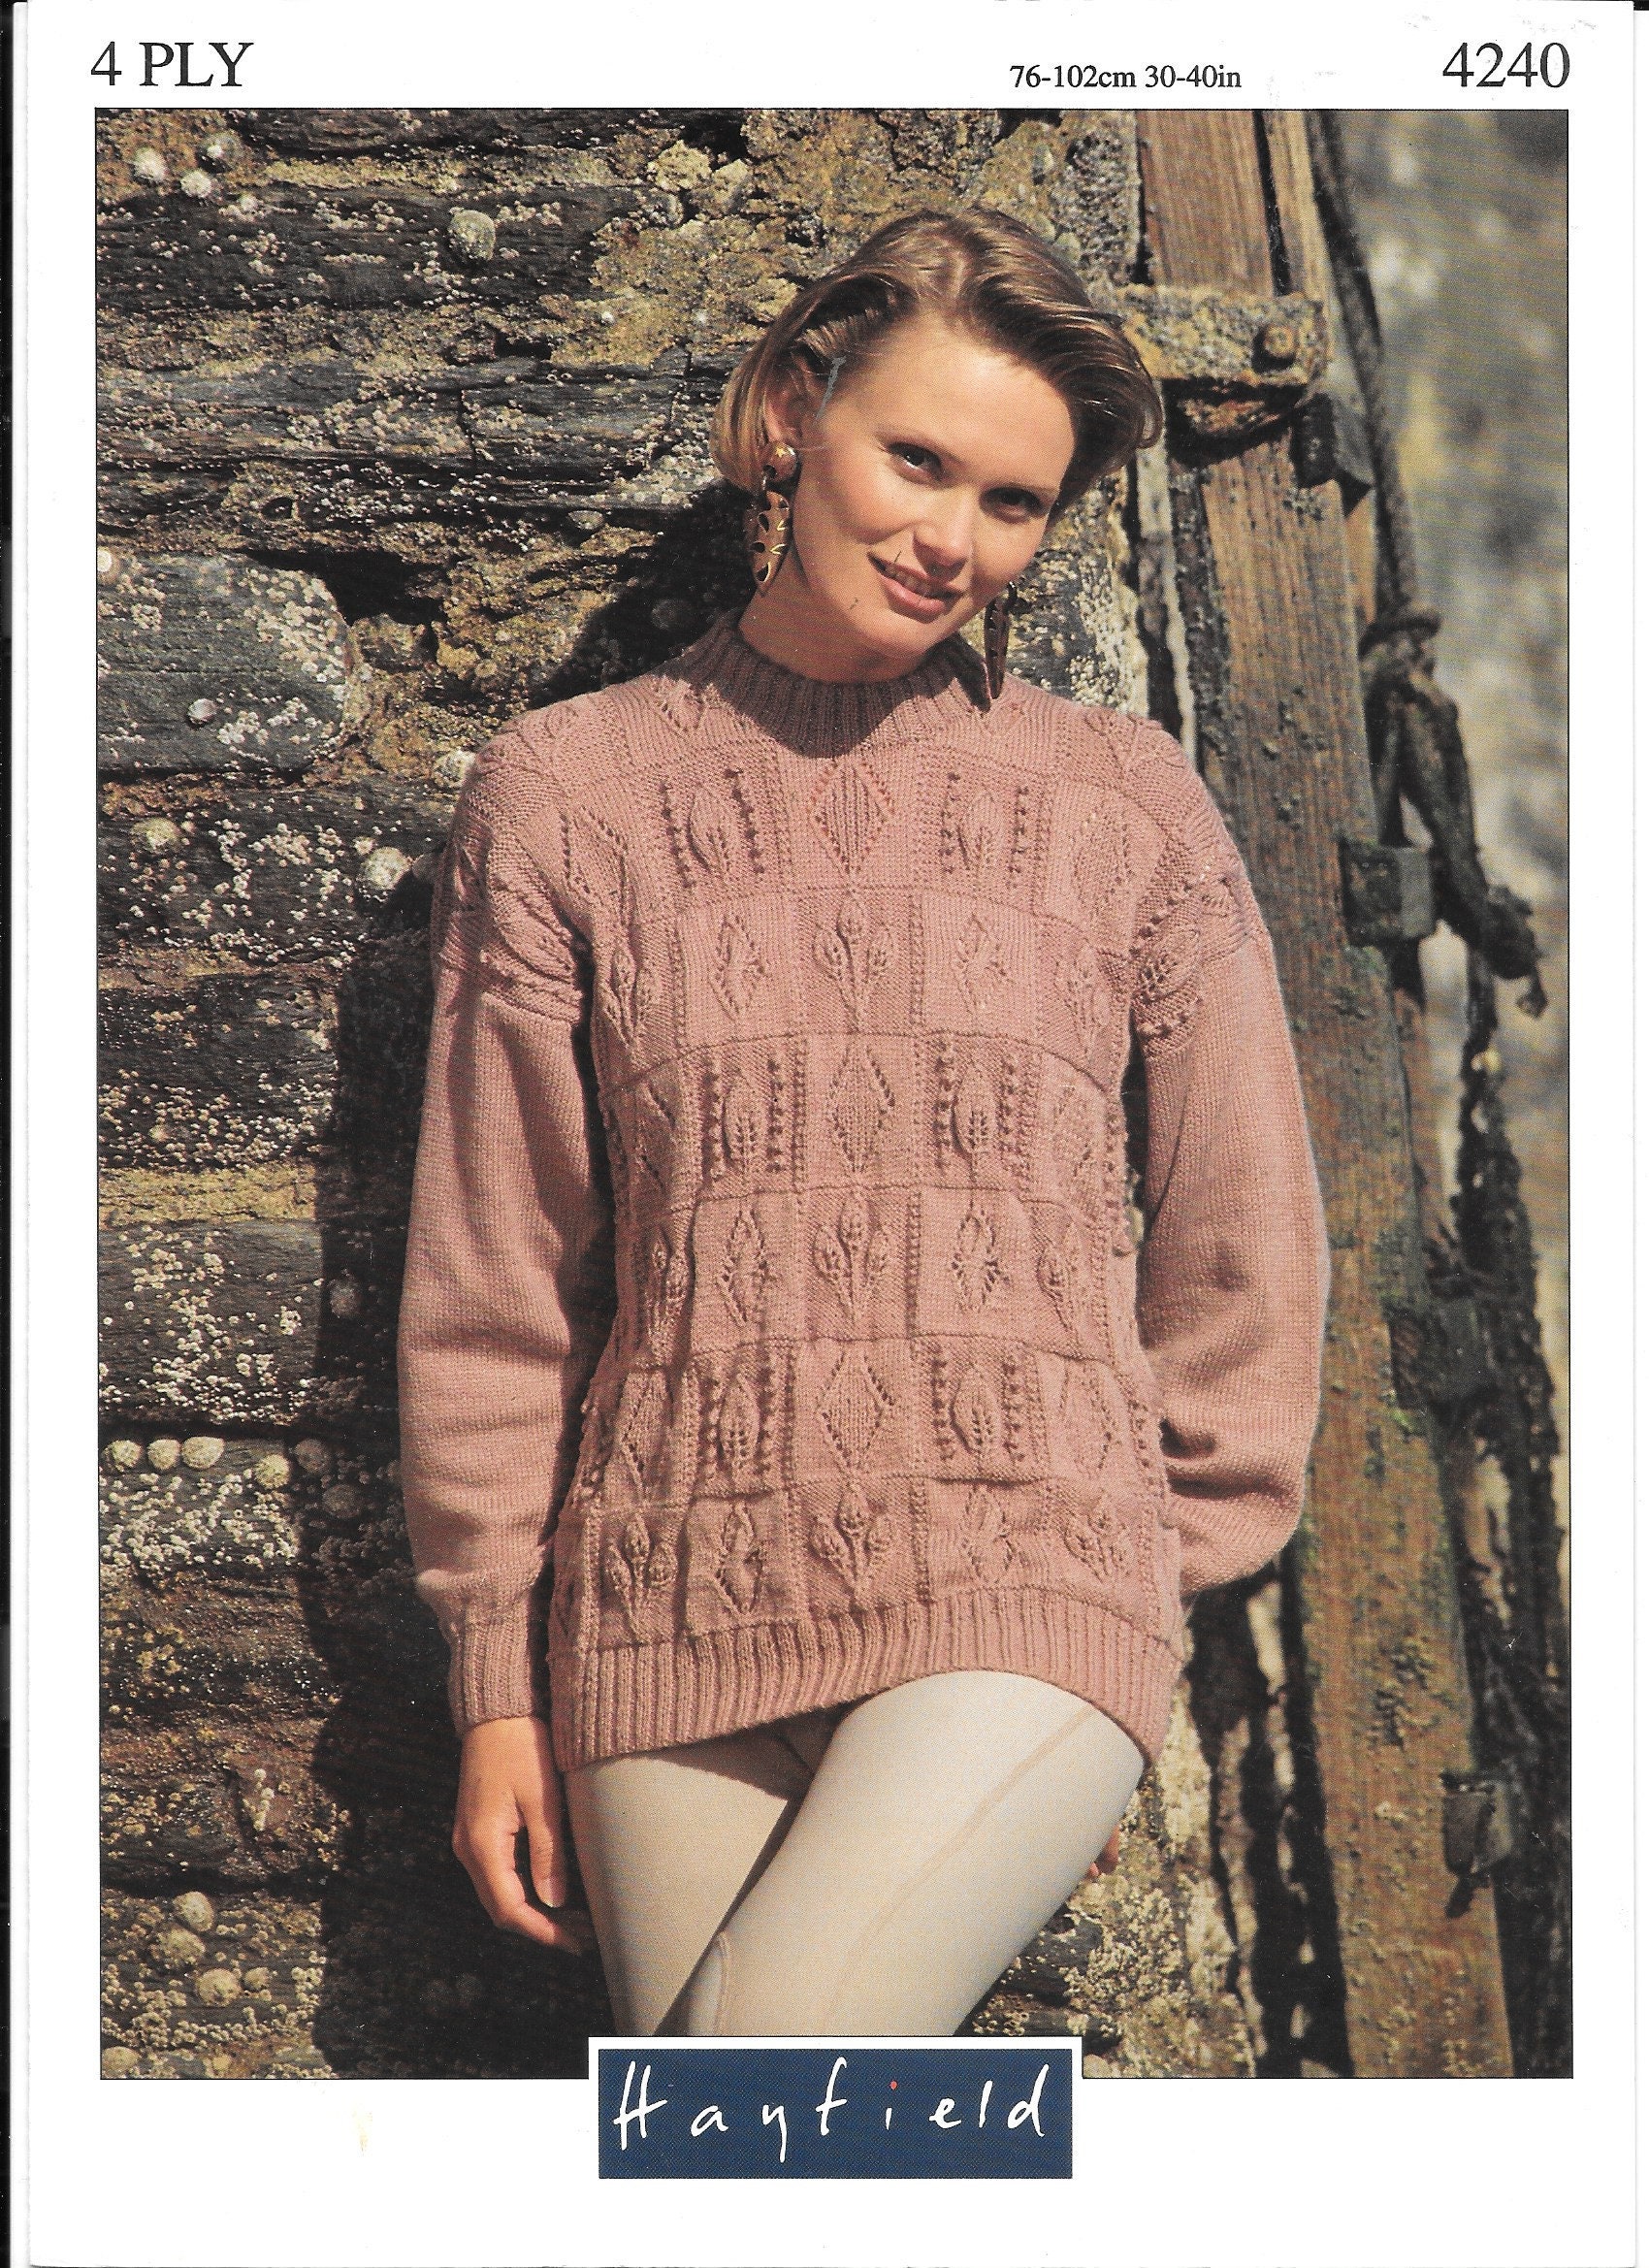 UK unusual knitting pattern for a ladies long patterned jumper | Etsy